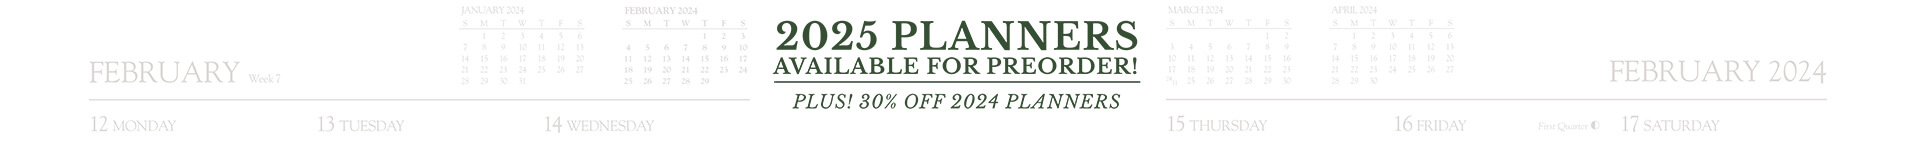 2025 Planners Available for Preorder